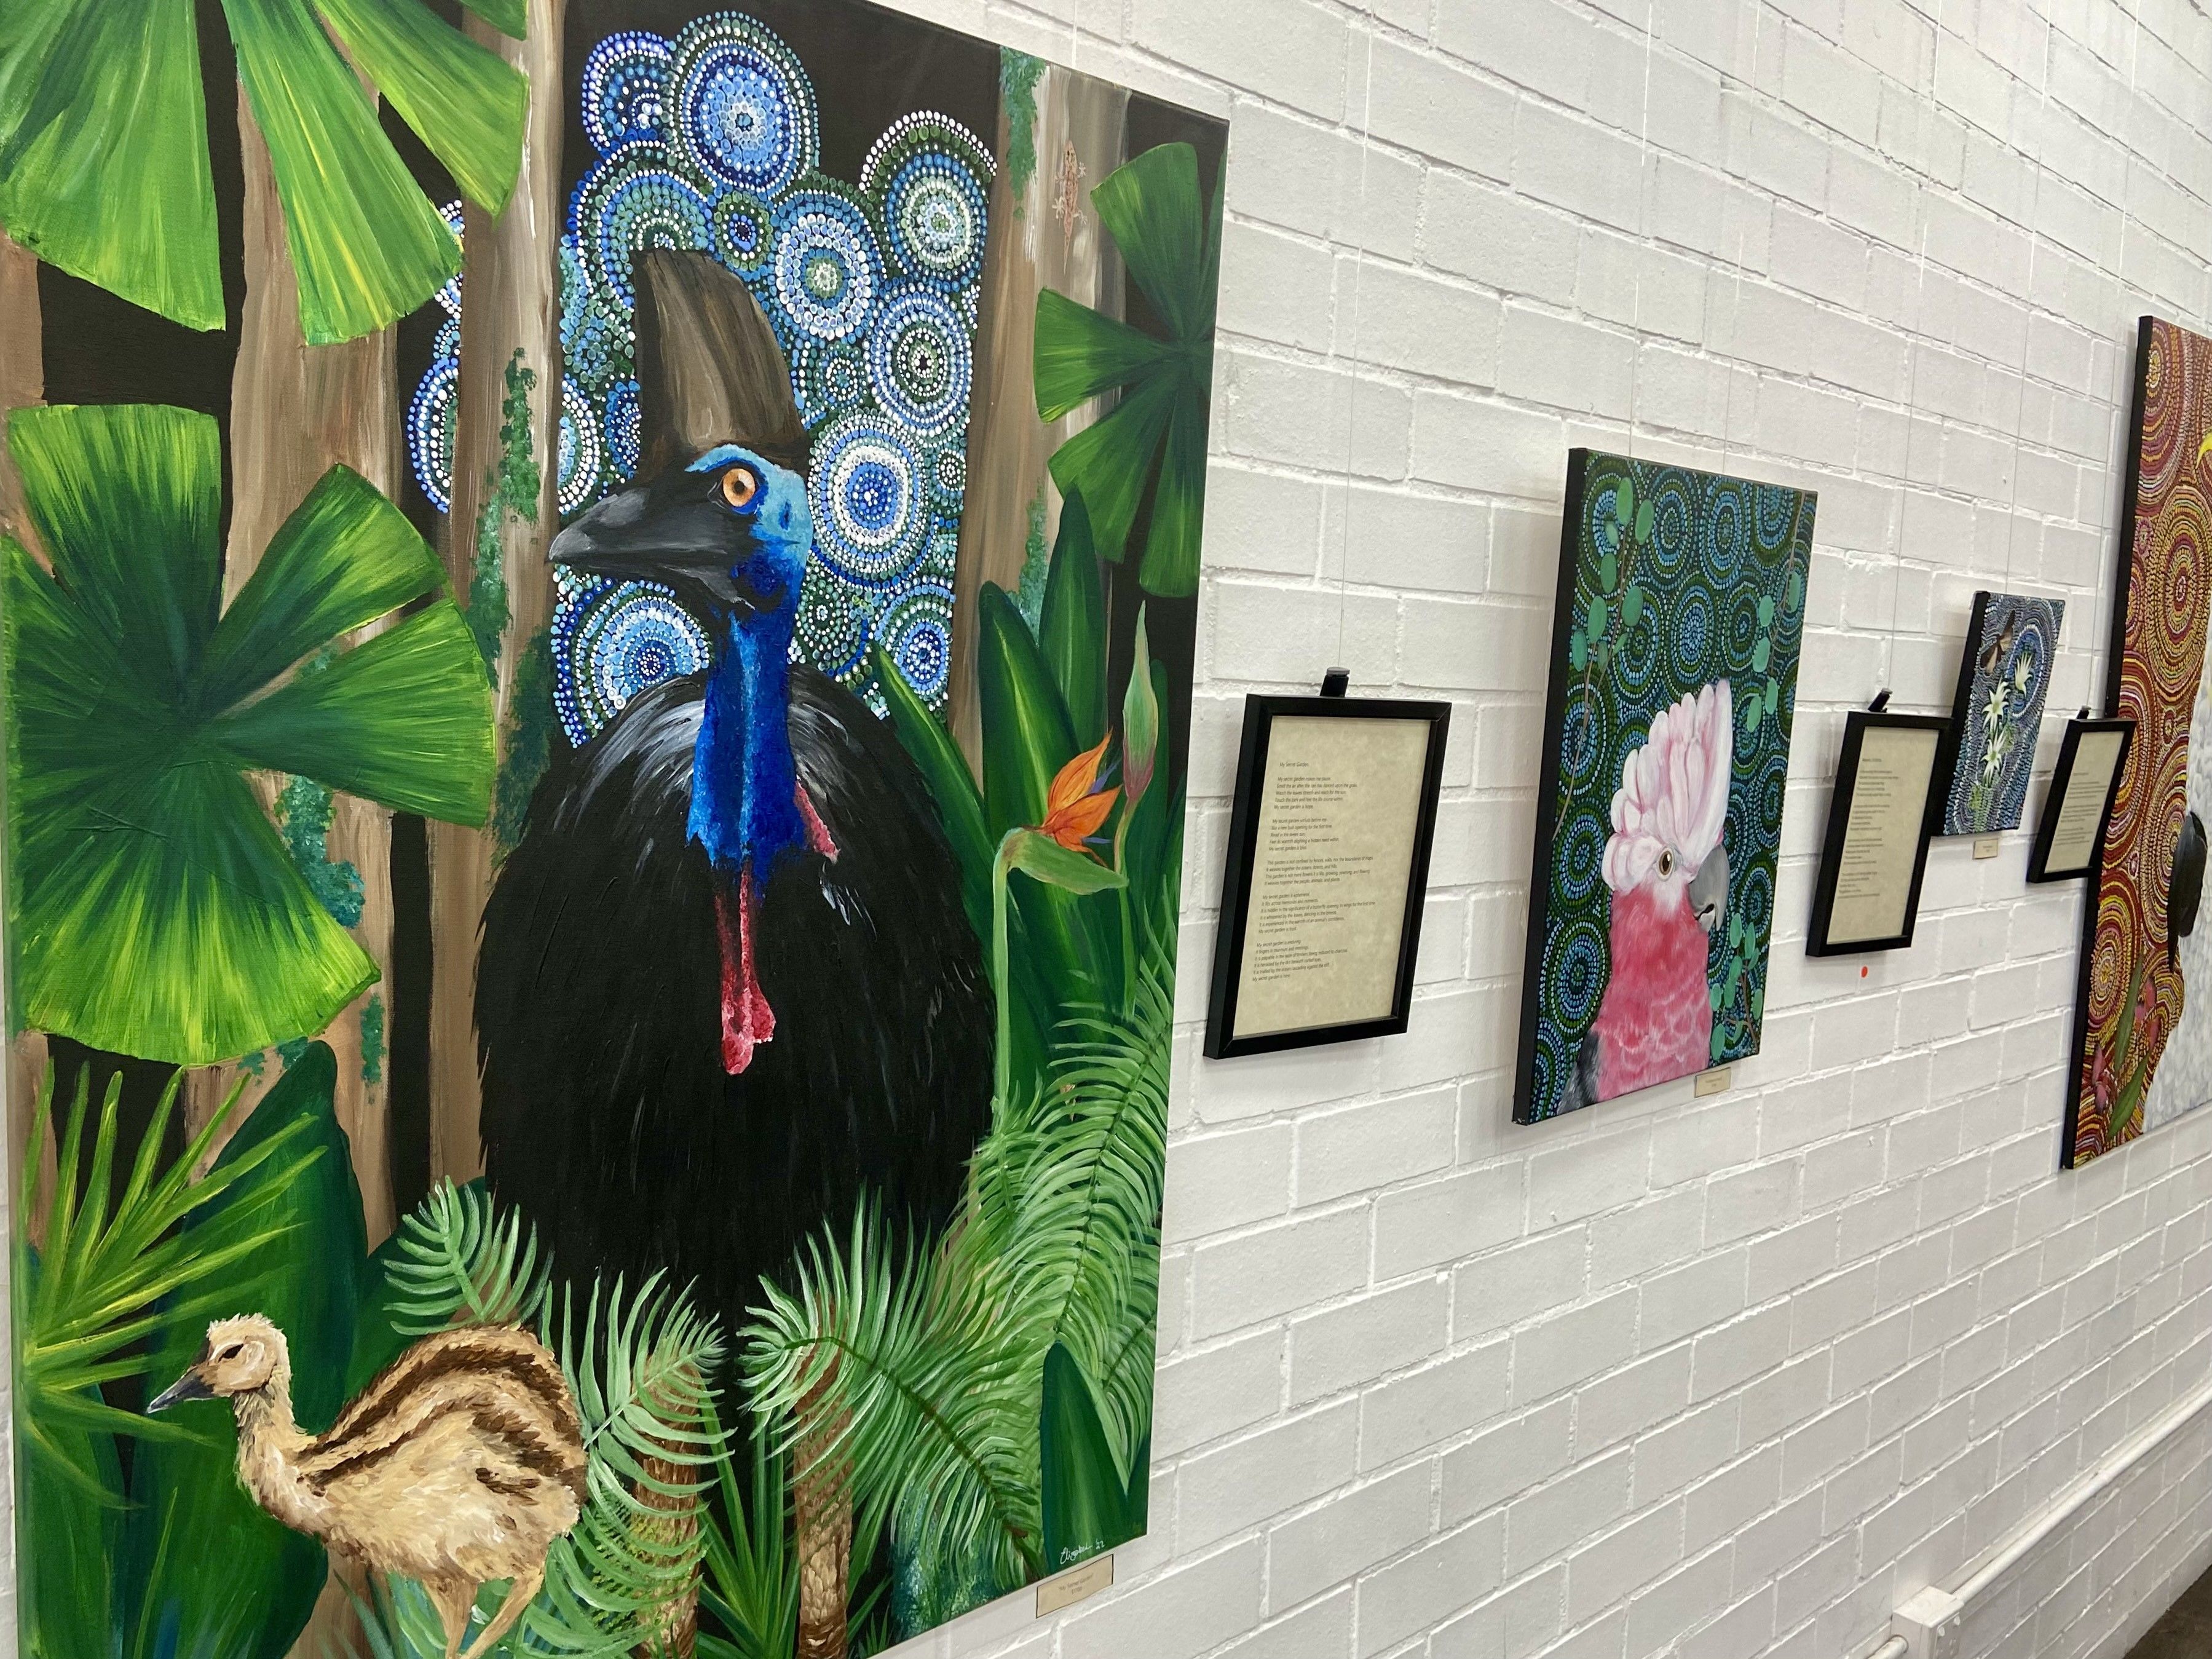 Wiradjuri artist Elizabeth Doherty's exhibition of painting My Secret Garden is on display at the Curious Rabbit in Wagga Wagga